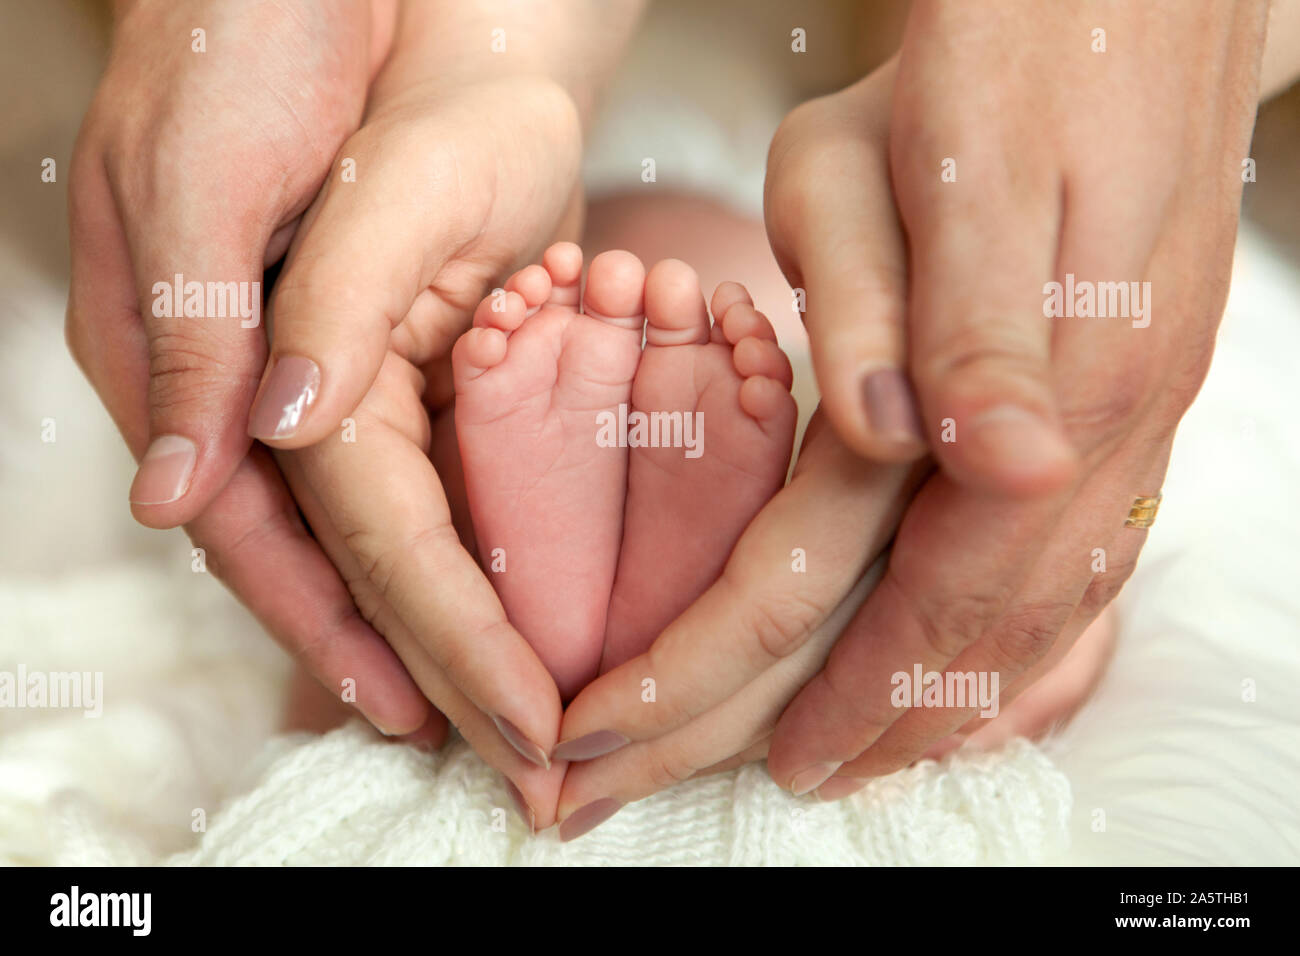 Parenting hands hold the newborn baby's soles. Macro shoot. Conceptual picture for family love, newborn, adoption, baby. Stock Photo